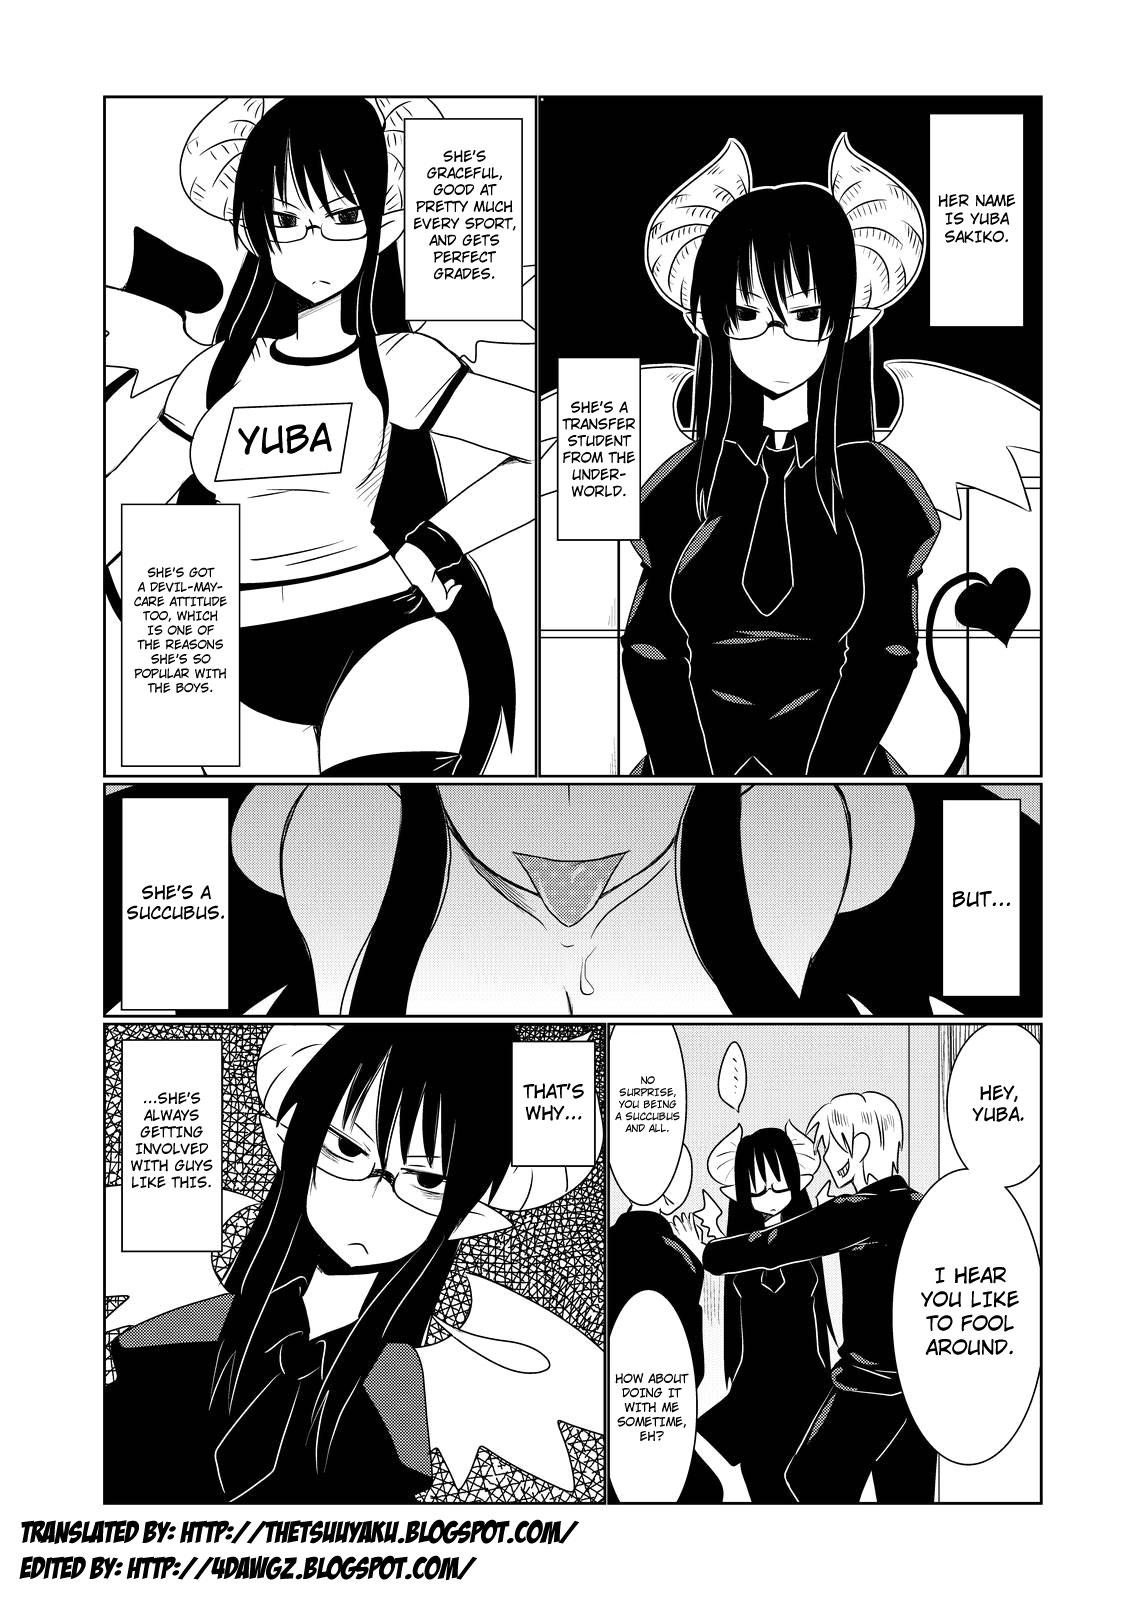 Khmer JK Succubus no Renai Jijou. | Thoughts on Love by a Female High School Succubus Grandmother - Page 2